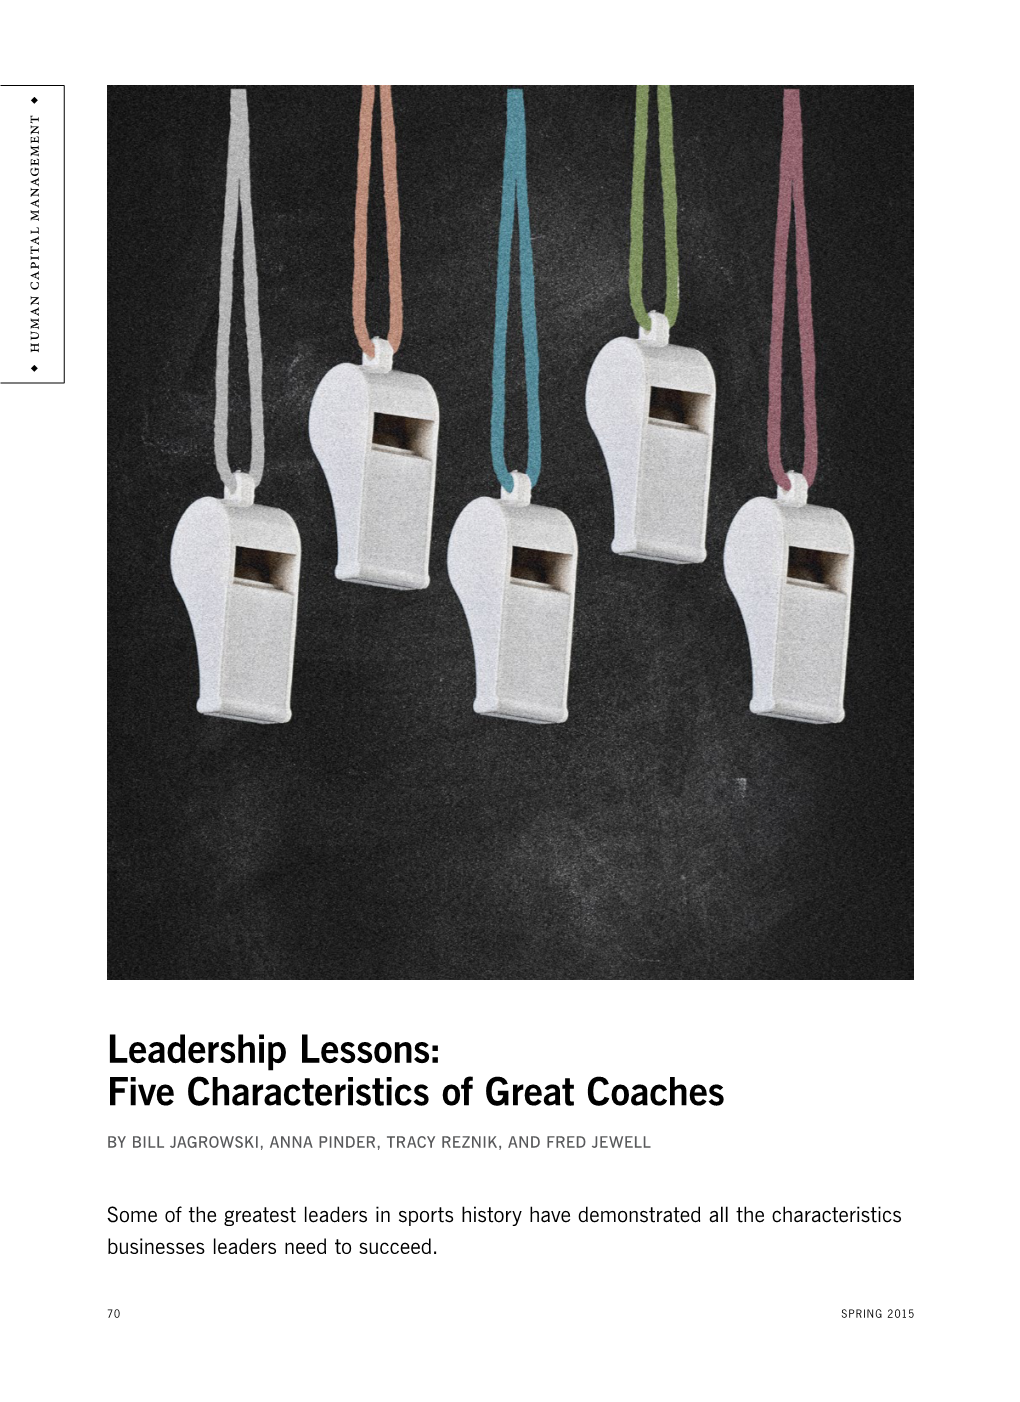 Leadership Lessons: Five Characteristics of Great Coaches